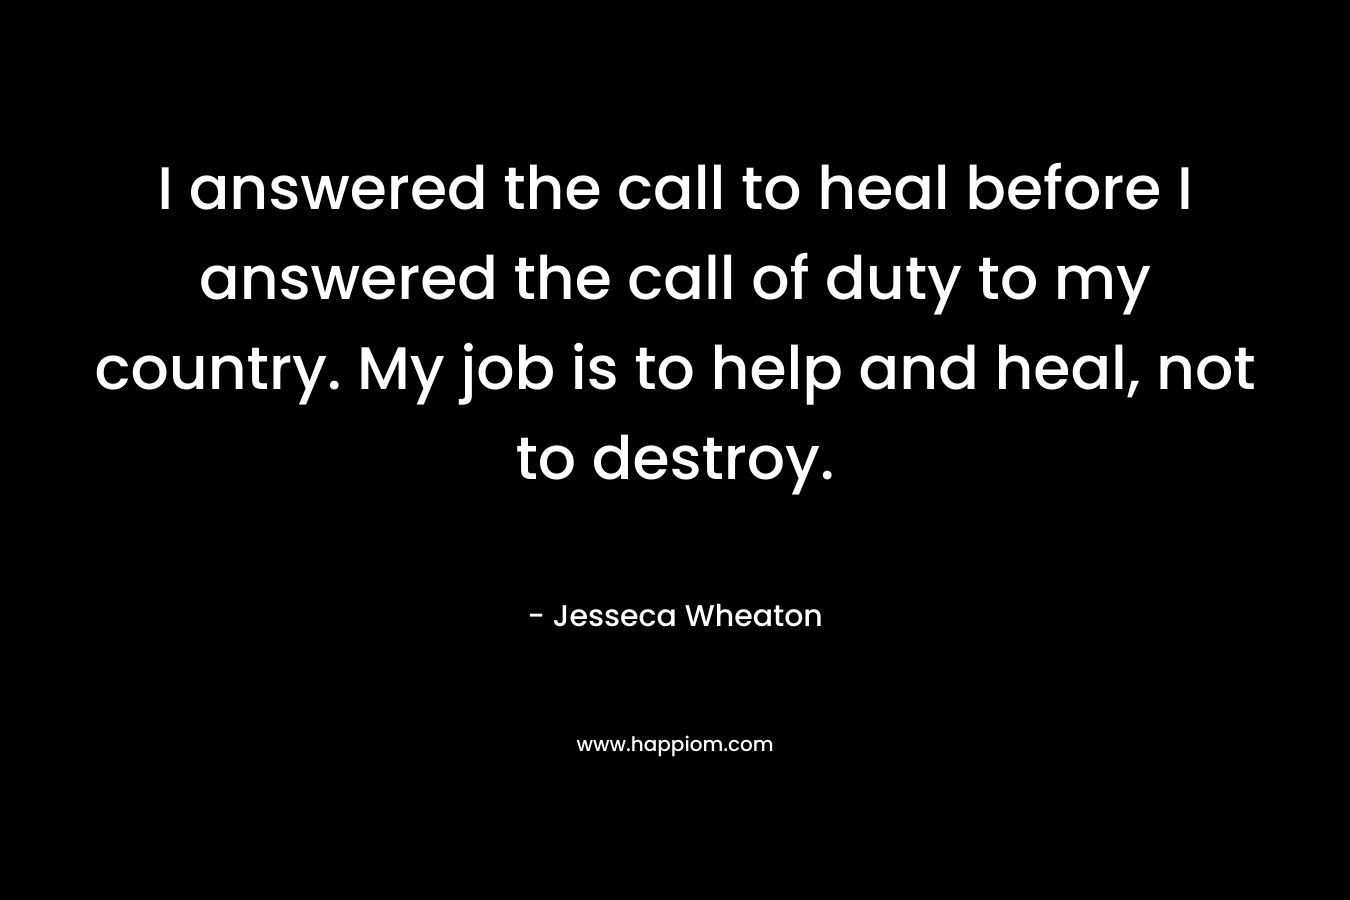 I answered the call to heal before I answered the call of duty to my country. My job is to help and heal, not to destroy.